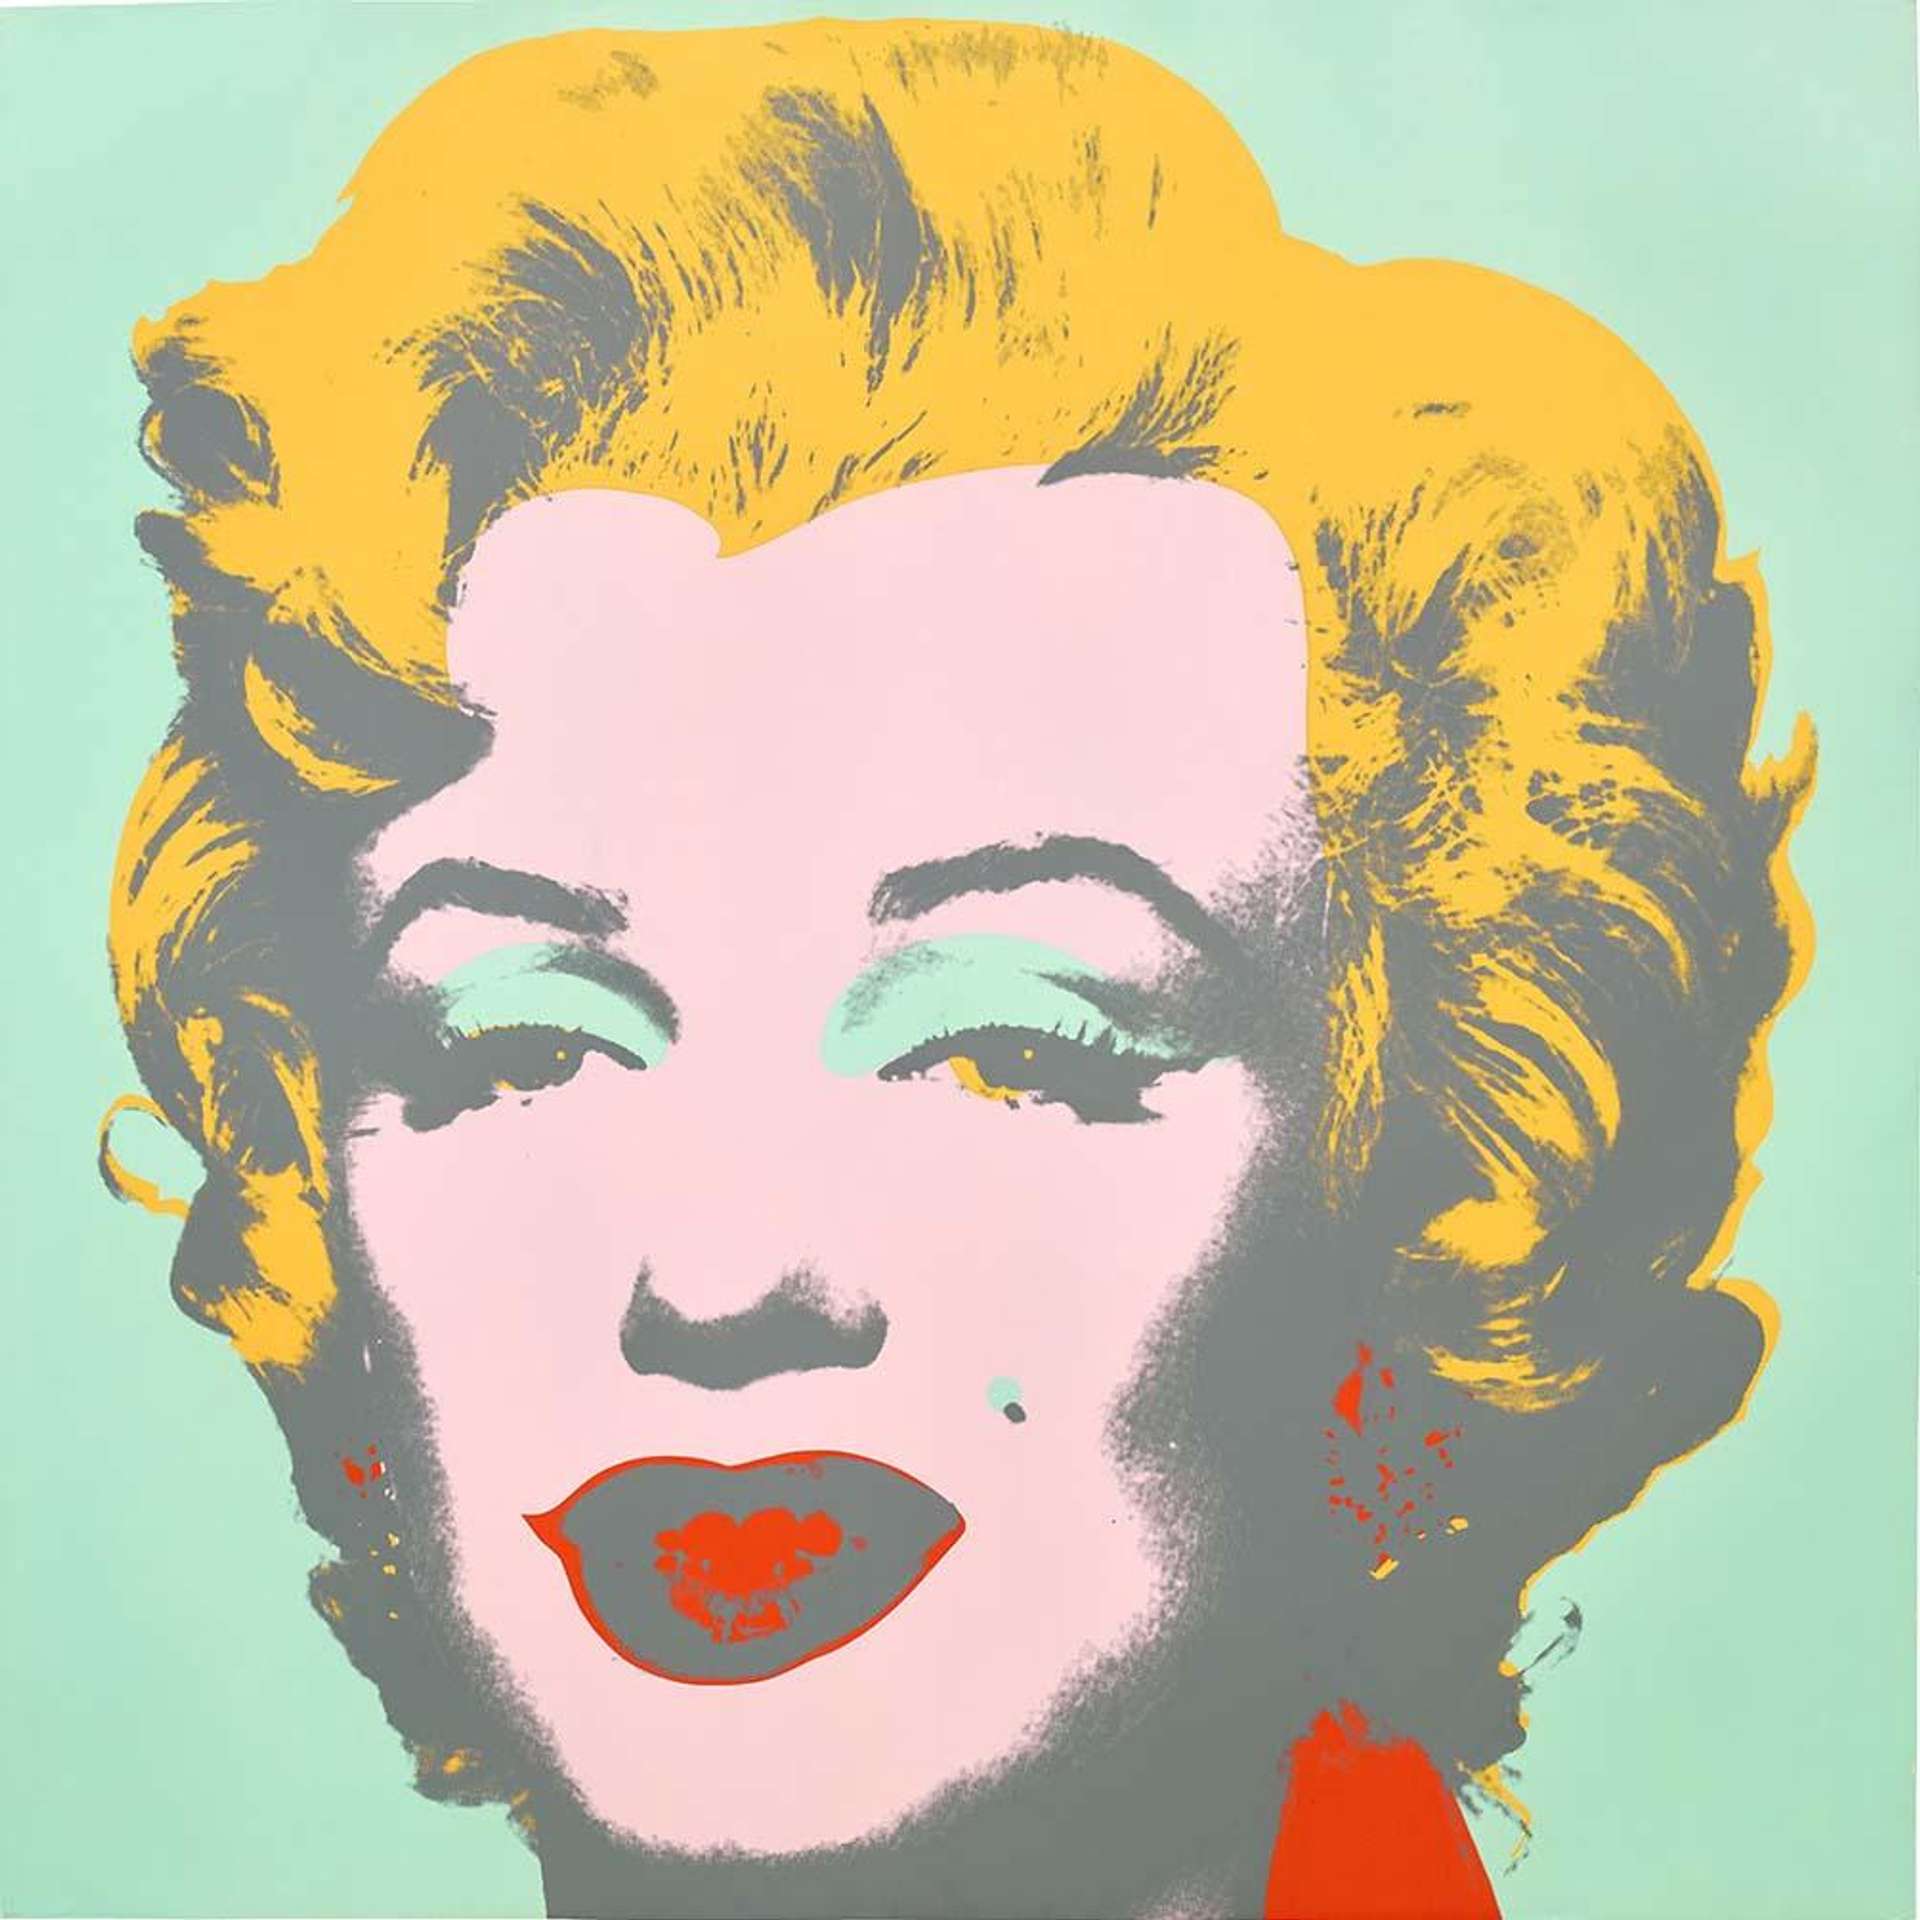 A screenprint by Andy Warhol depicting Marilyn Monroe's portrait at the centre of a mint green background.